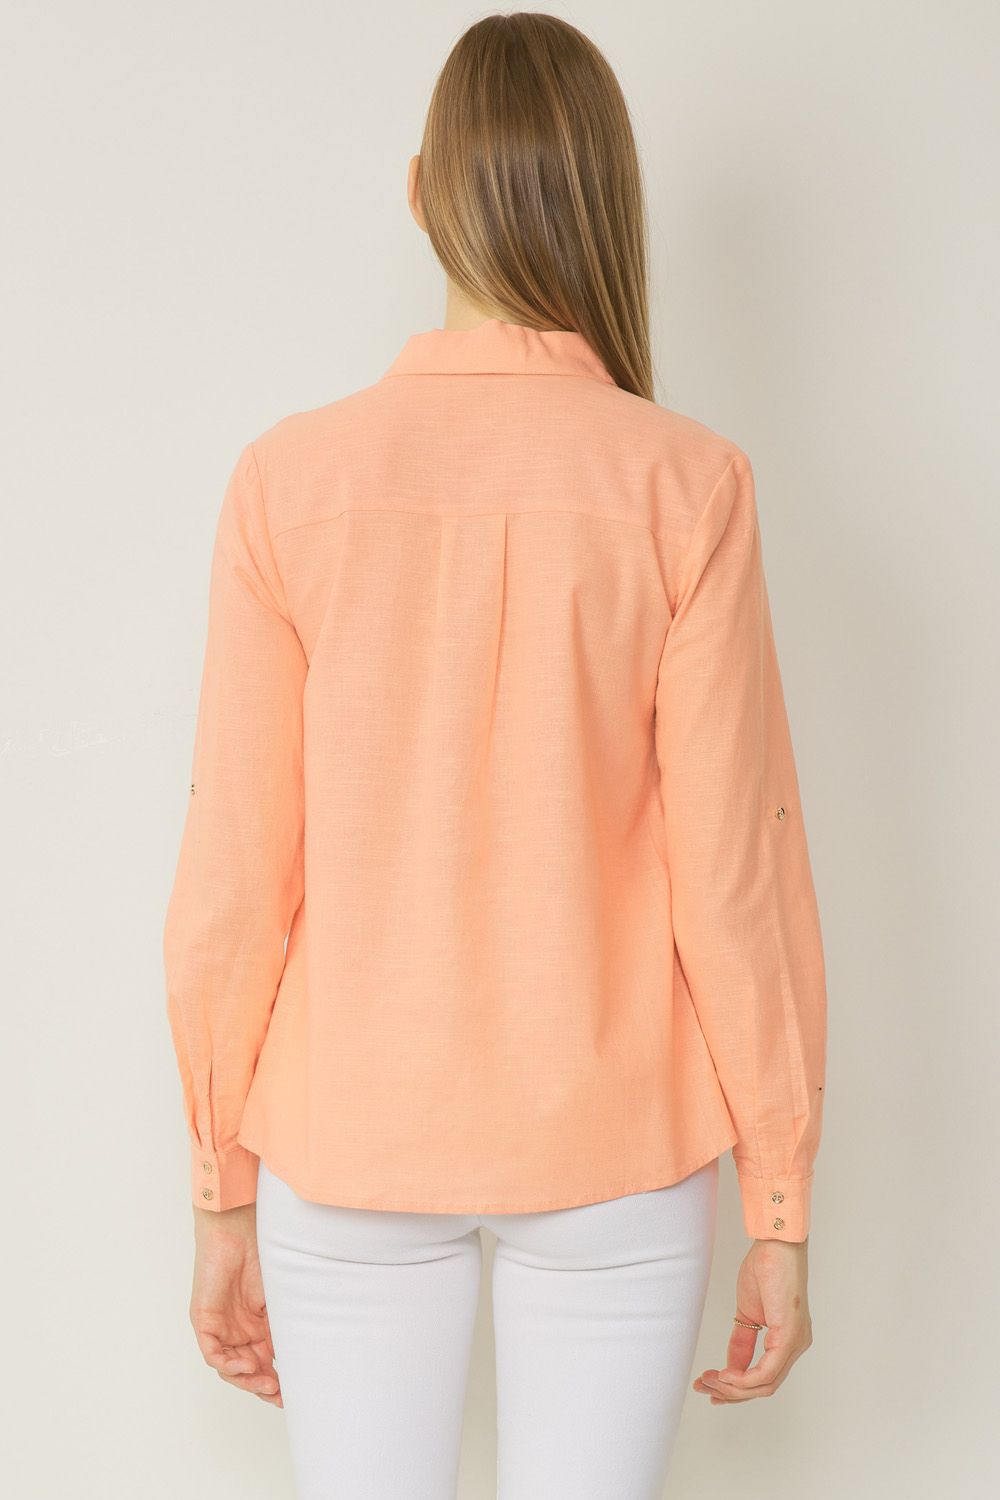 V-Neck Linen Button Down - Peach-100 Sleeveless Tops-entro-Coastal Bloom Boutique, find the trendiest versions of the popular styles and looks Located in Indialantic, FL